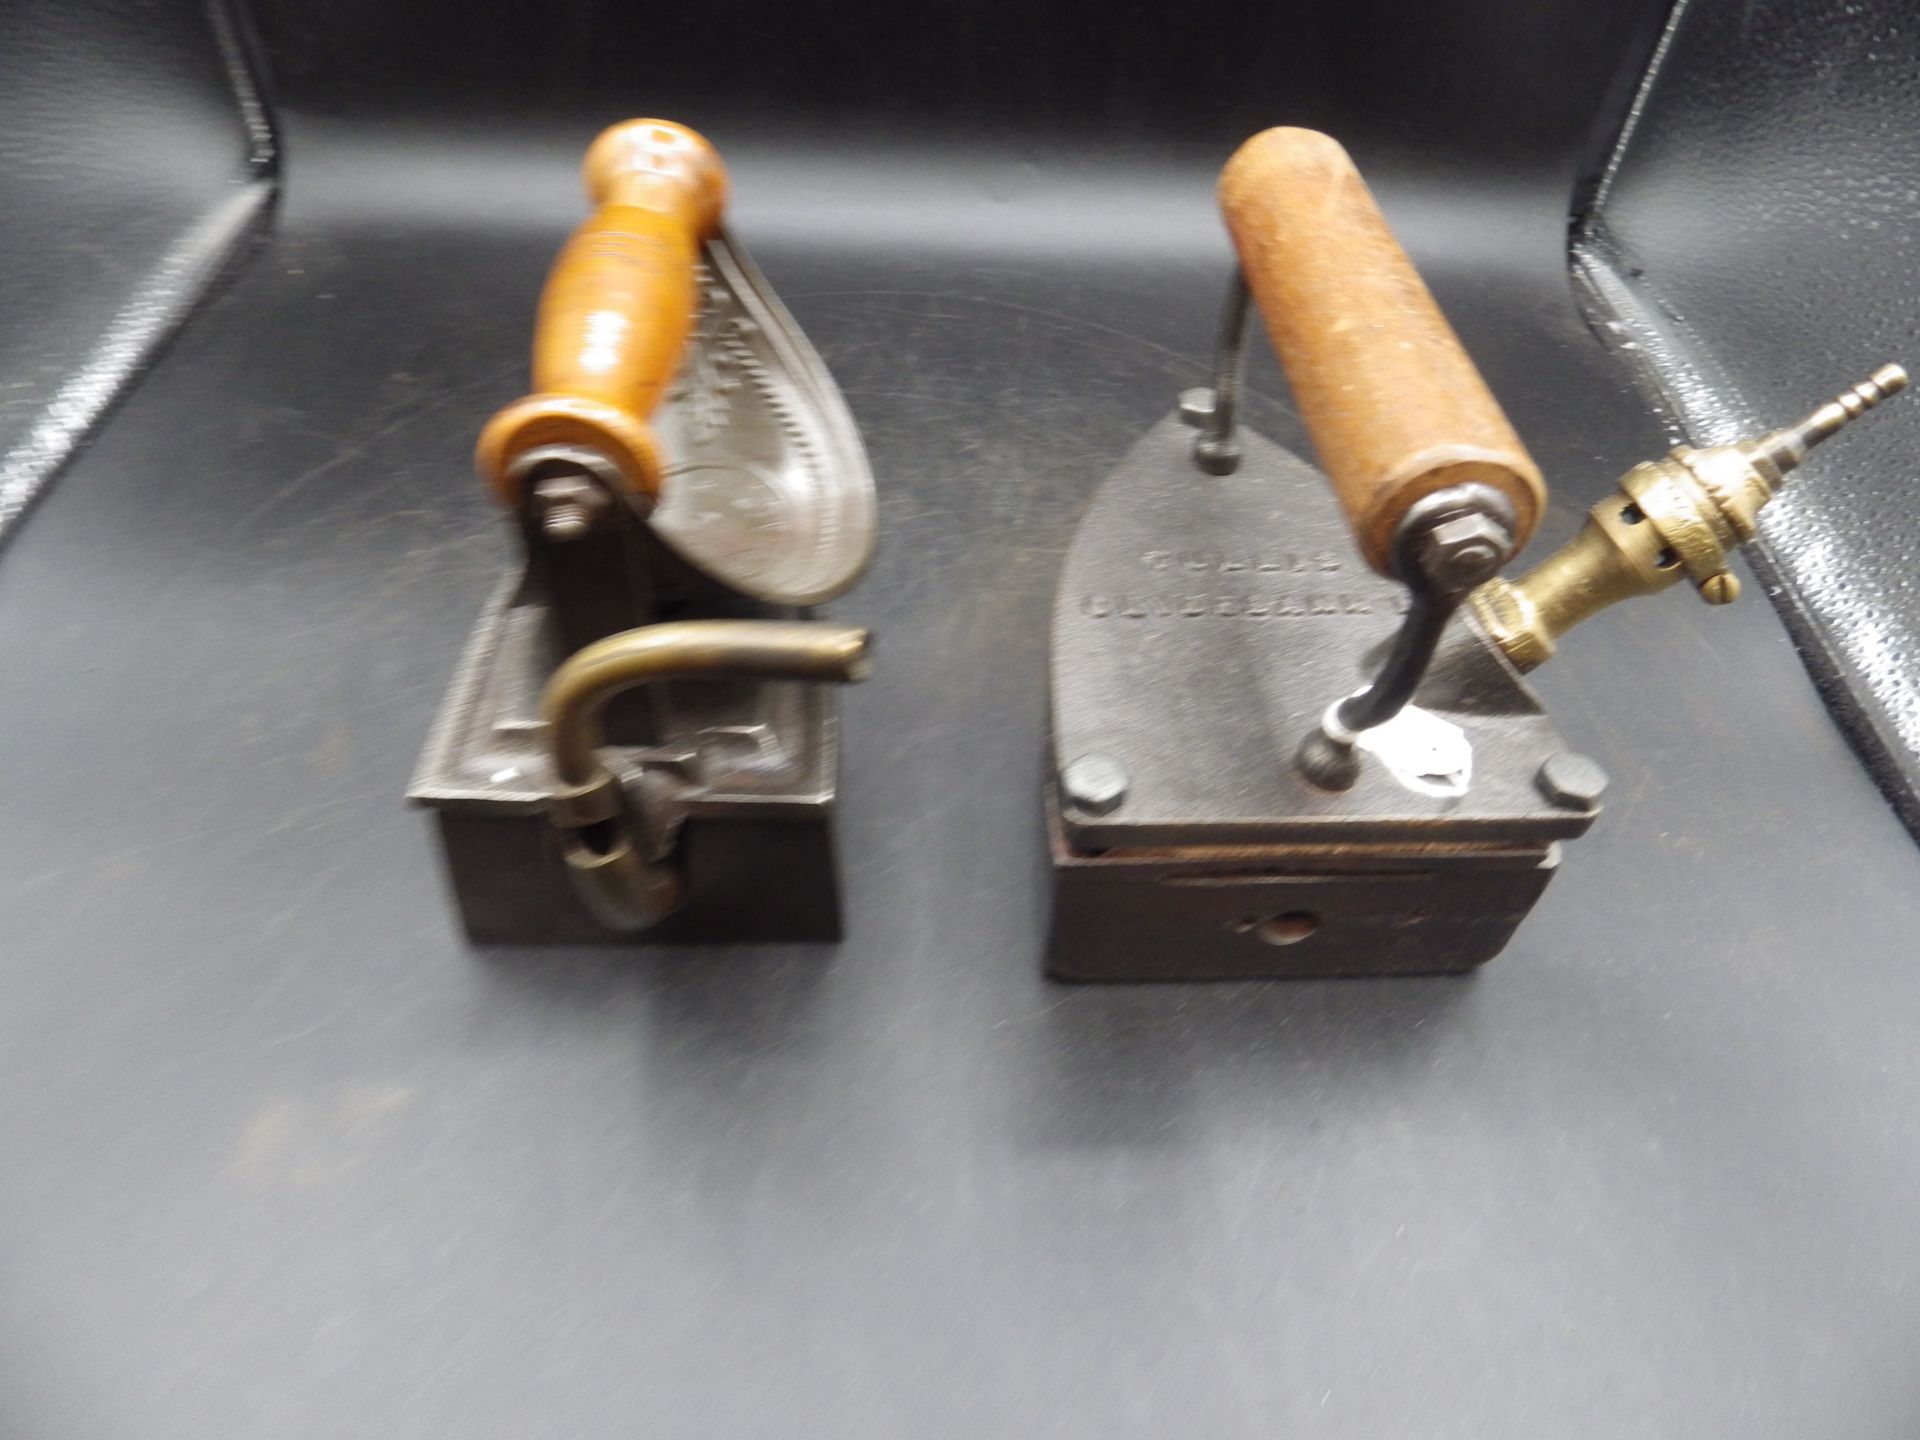 Little Gem patent gas iron together with a Tullis Clydebank NB gas iron (2 irons) - Image 5 of 5